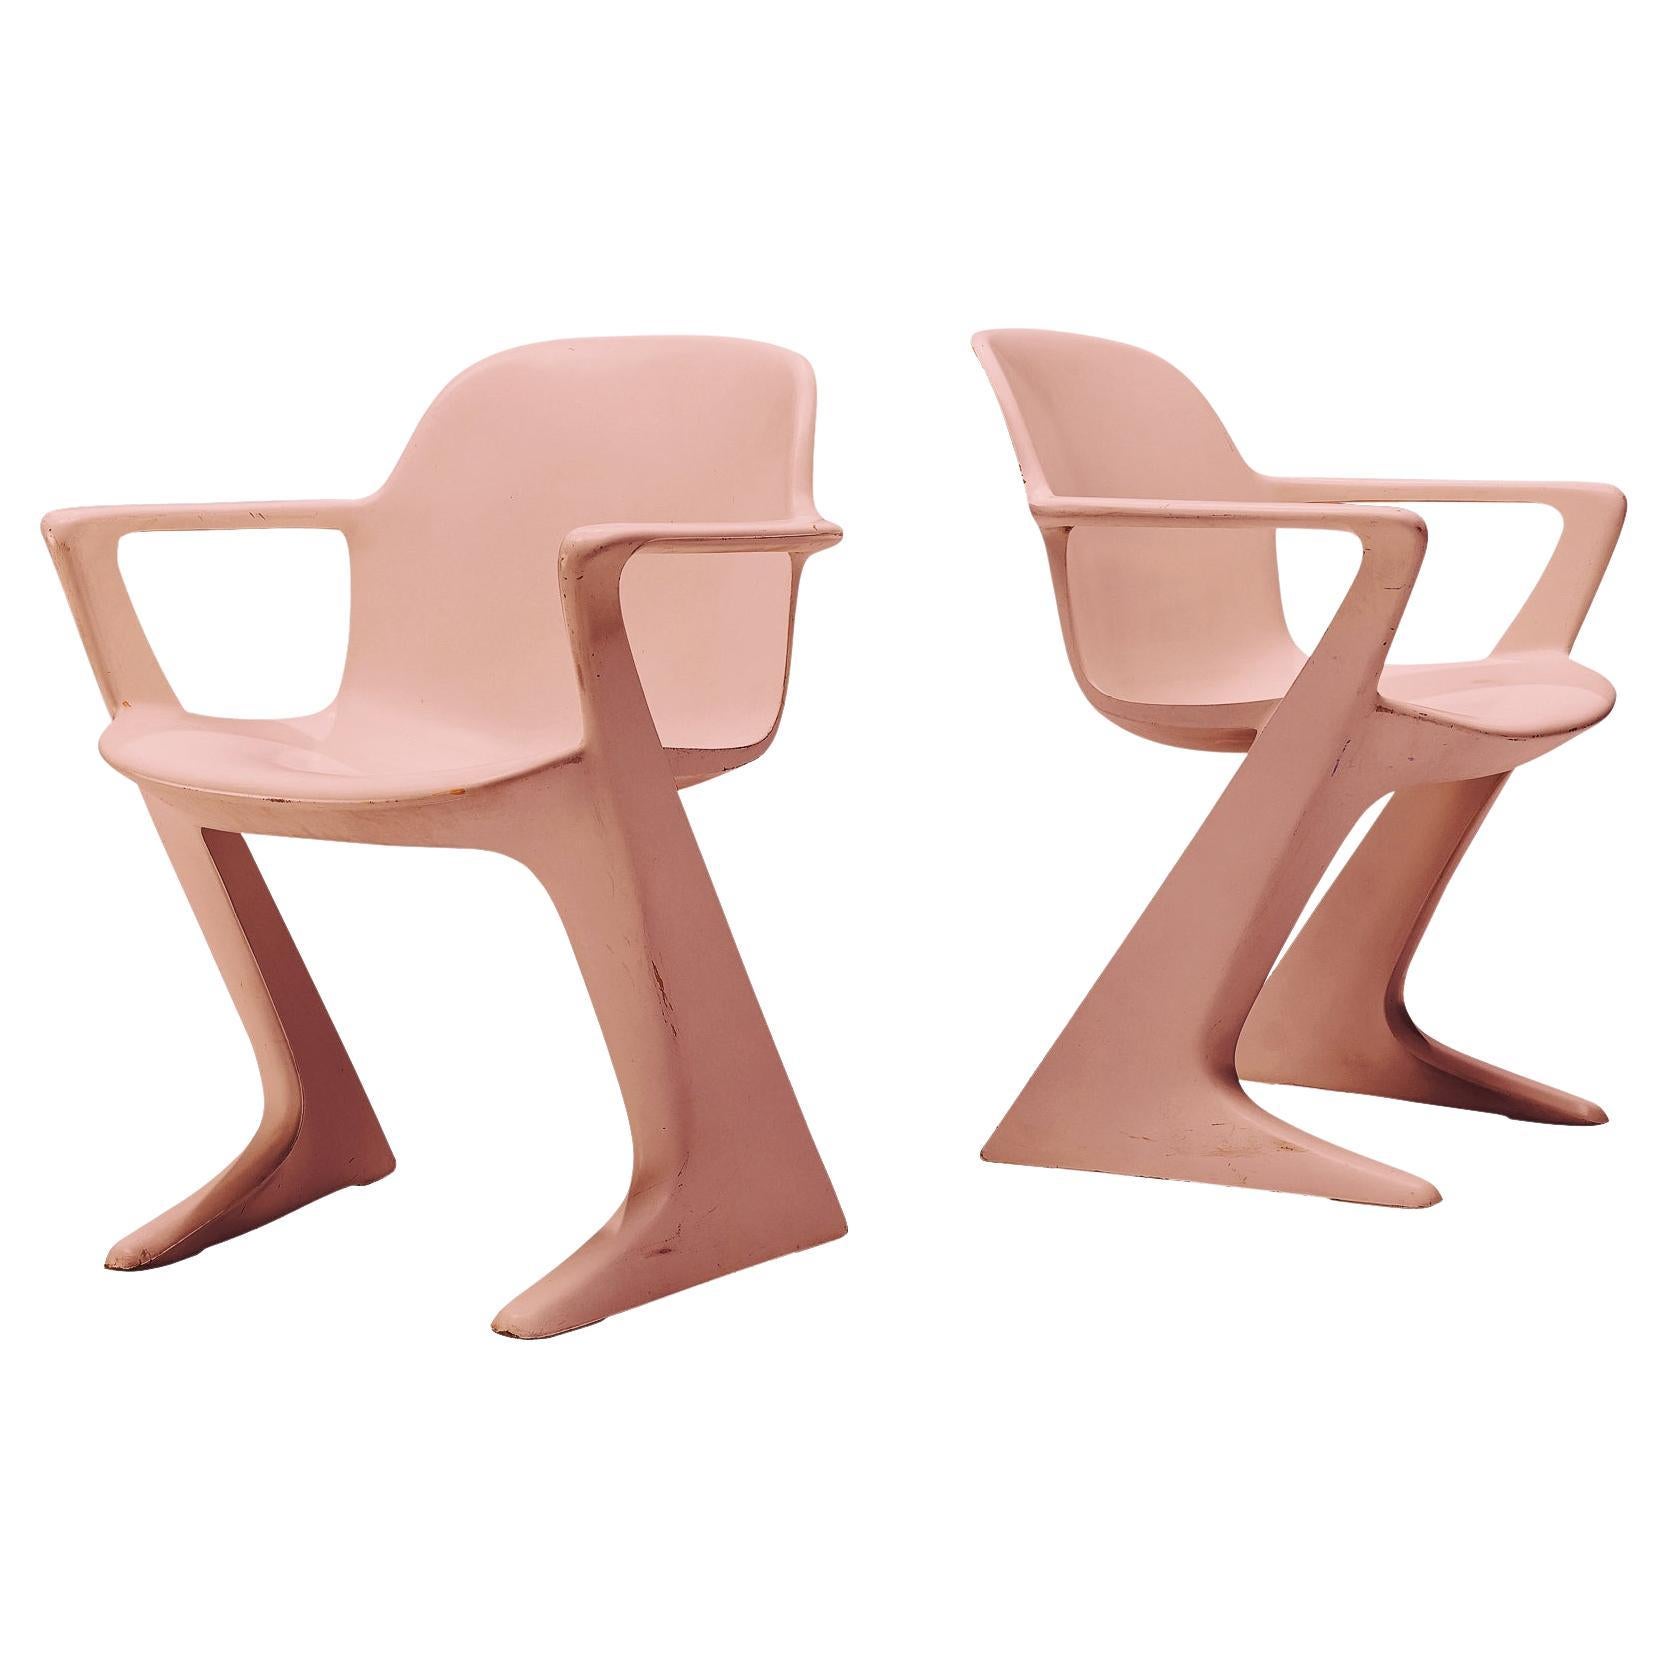 Ernst Moeckl 'Kangaroo' Dining Chairs in Soft Pink For Sale